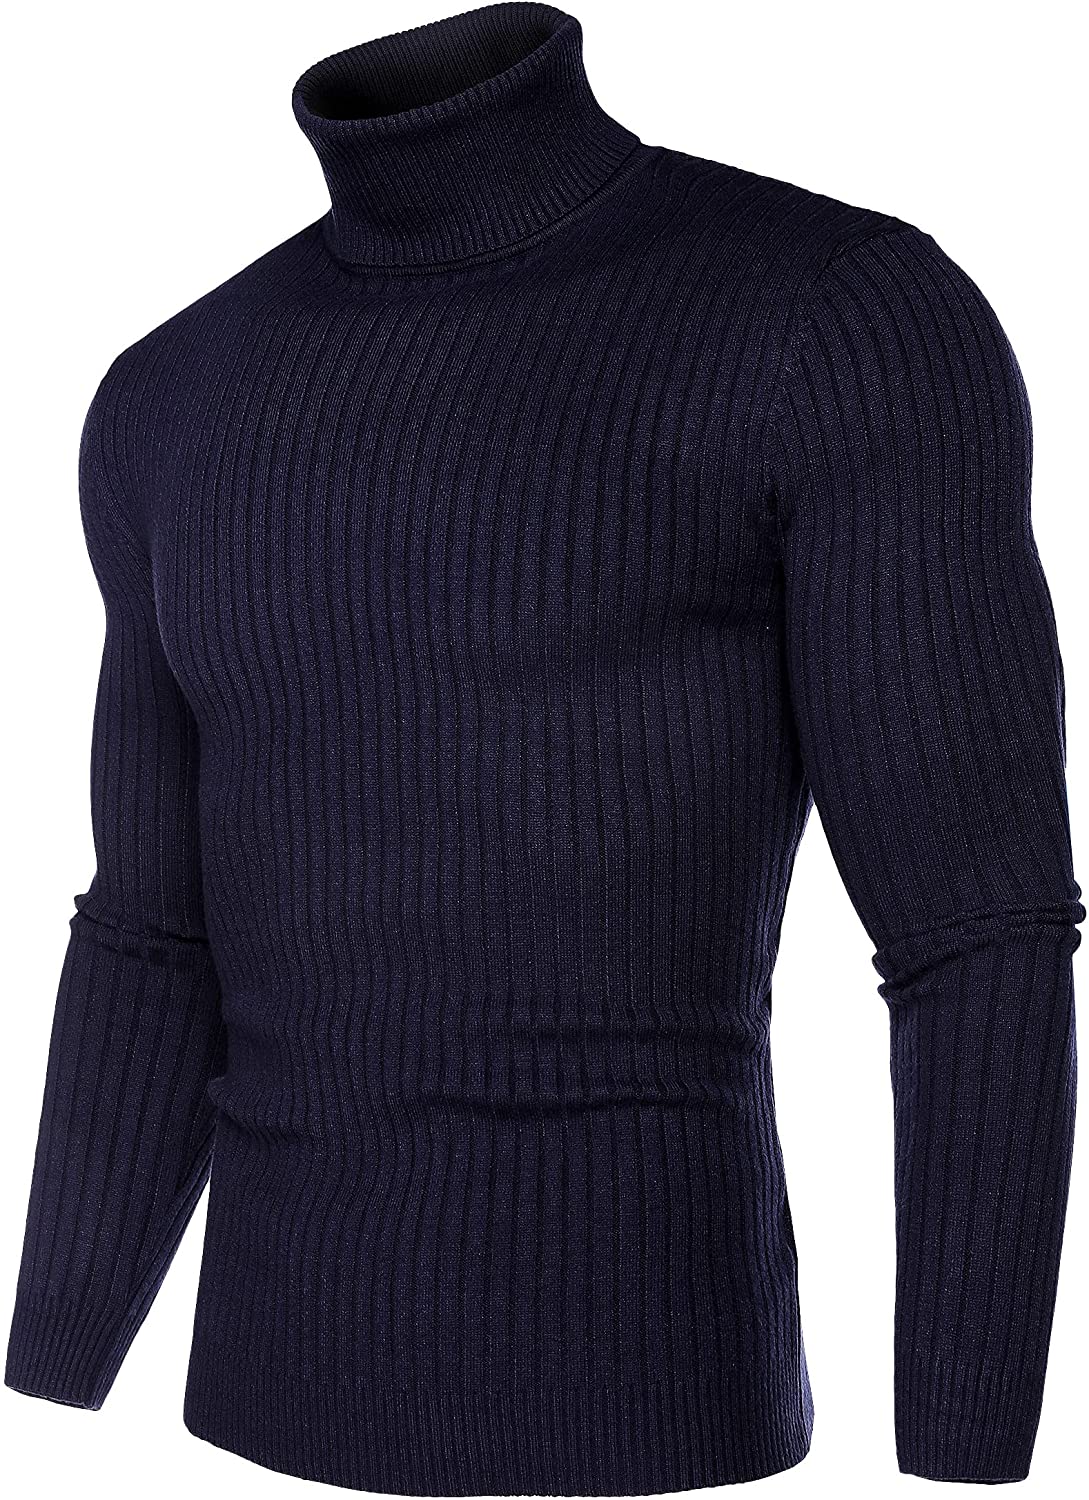 Juedoz Mens Turtleneck Sweater Slim Fit Soft Knitted Basic Pullover ...